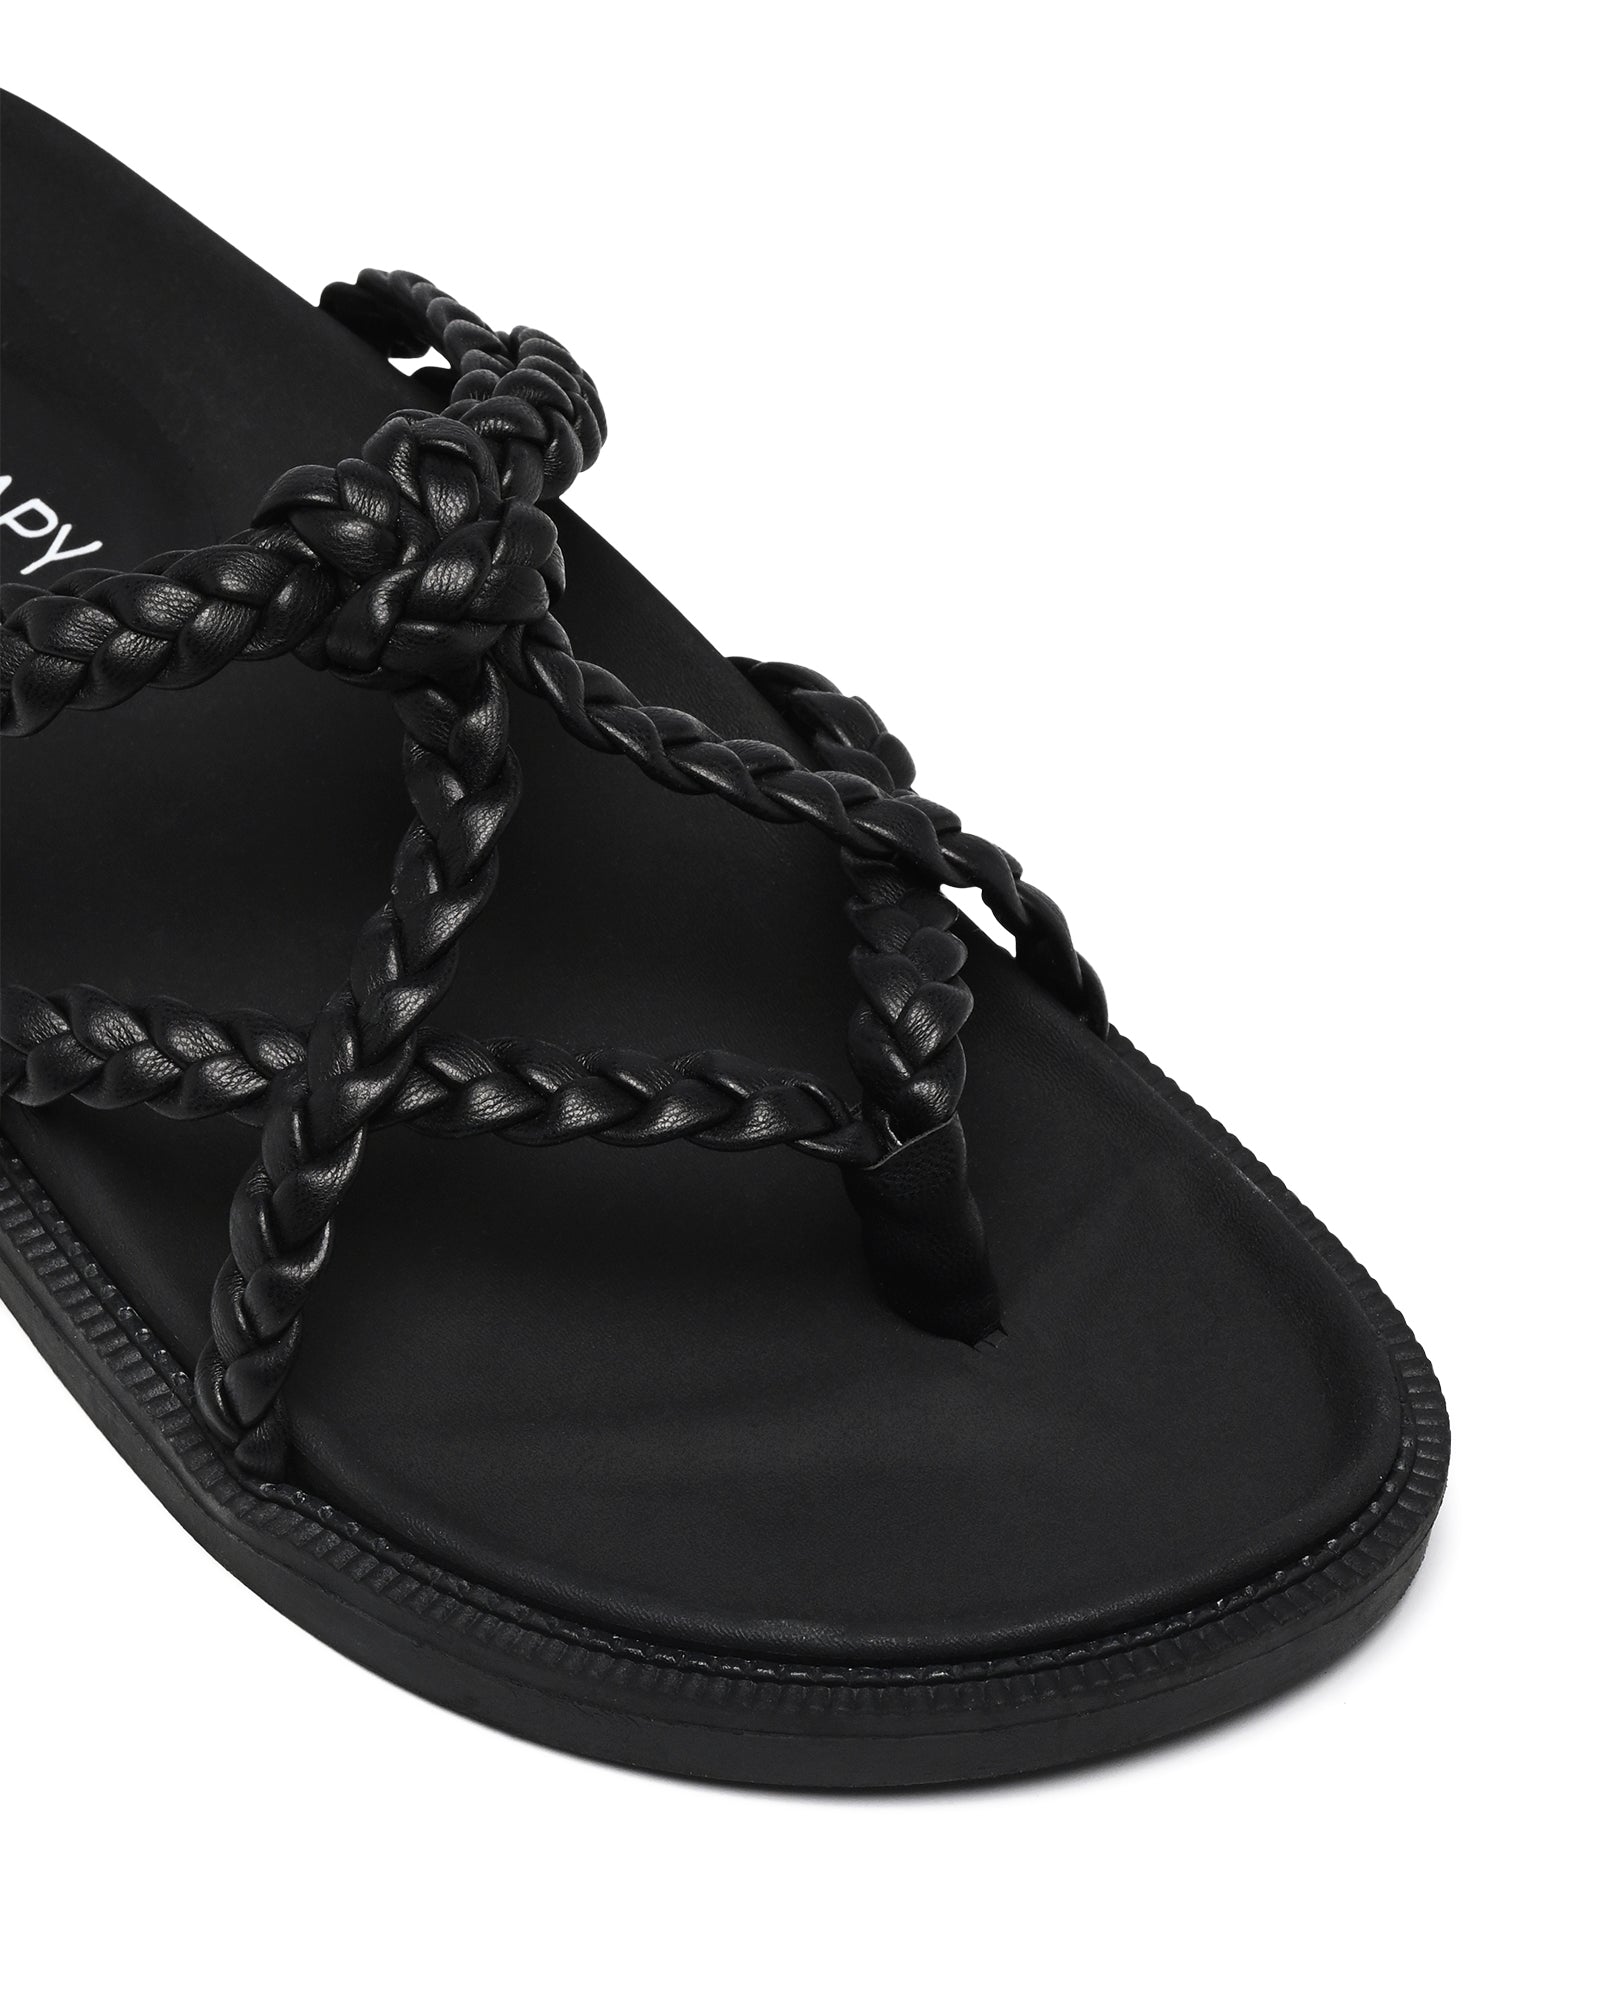 Therapy Shoes Emmie Black Smooth | Women's Sandals | Slides | Flats | Braid